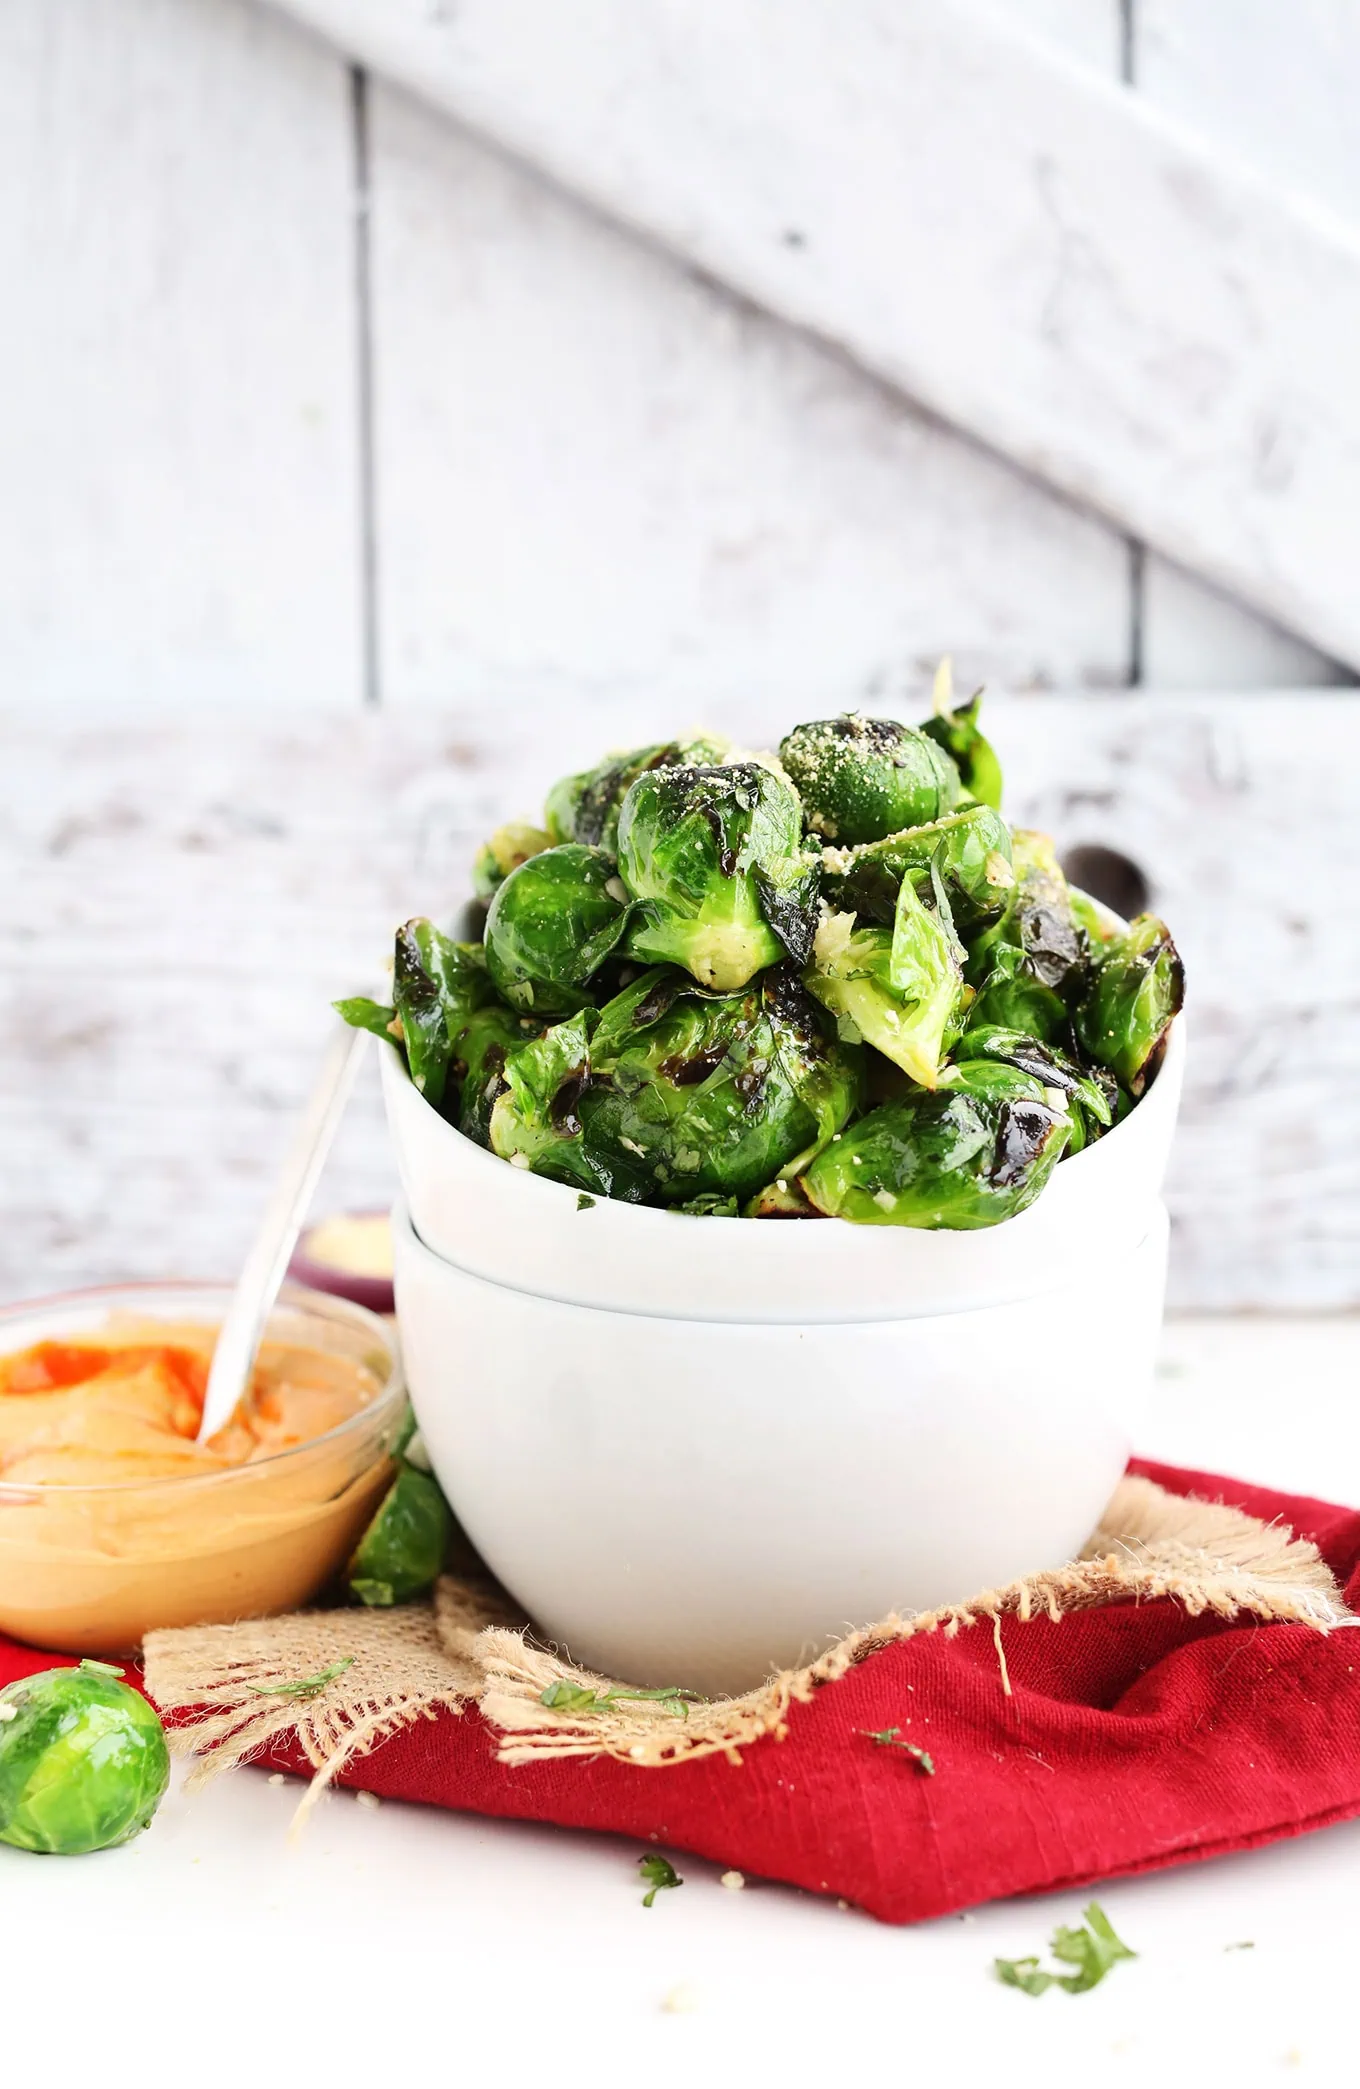 Crispy Roasted Brussels Sprouts with spicy Sriracha Aioli The perfect healthier appetizer or side dish vegan glutenfree healthy appetizer